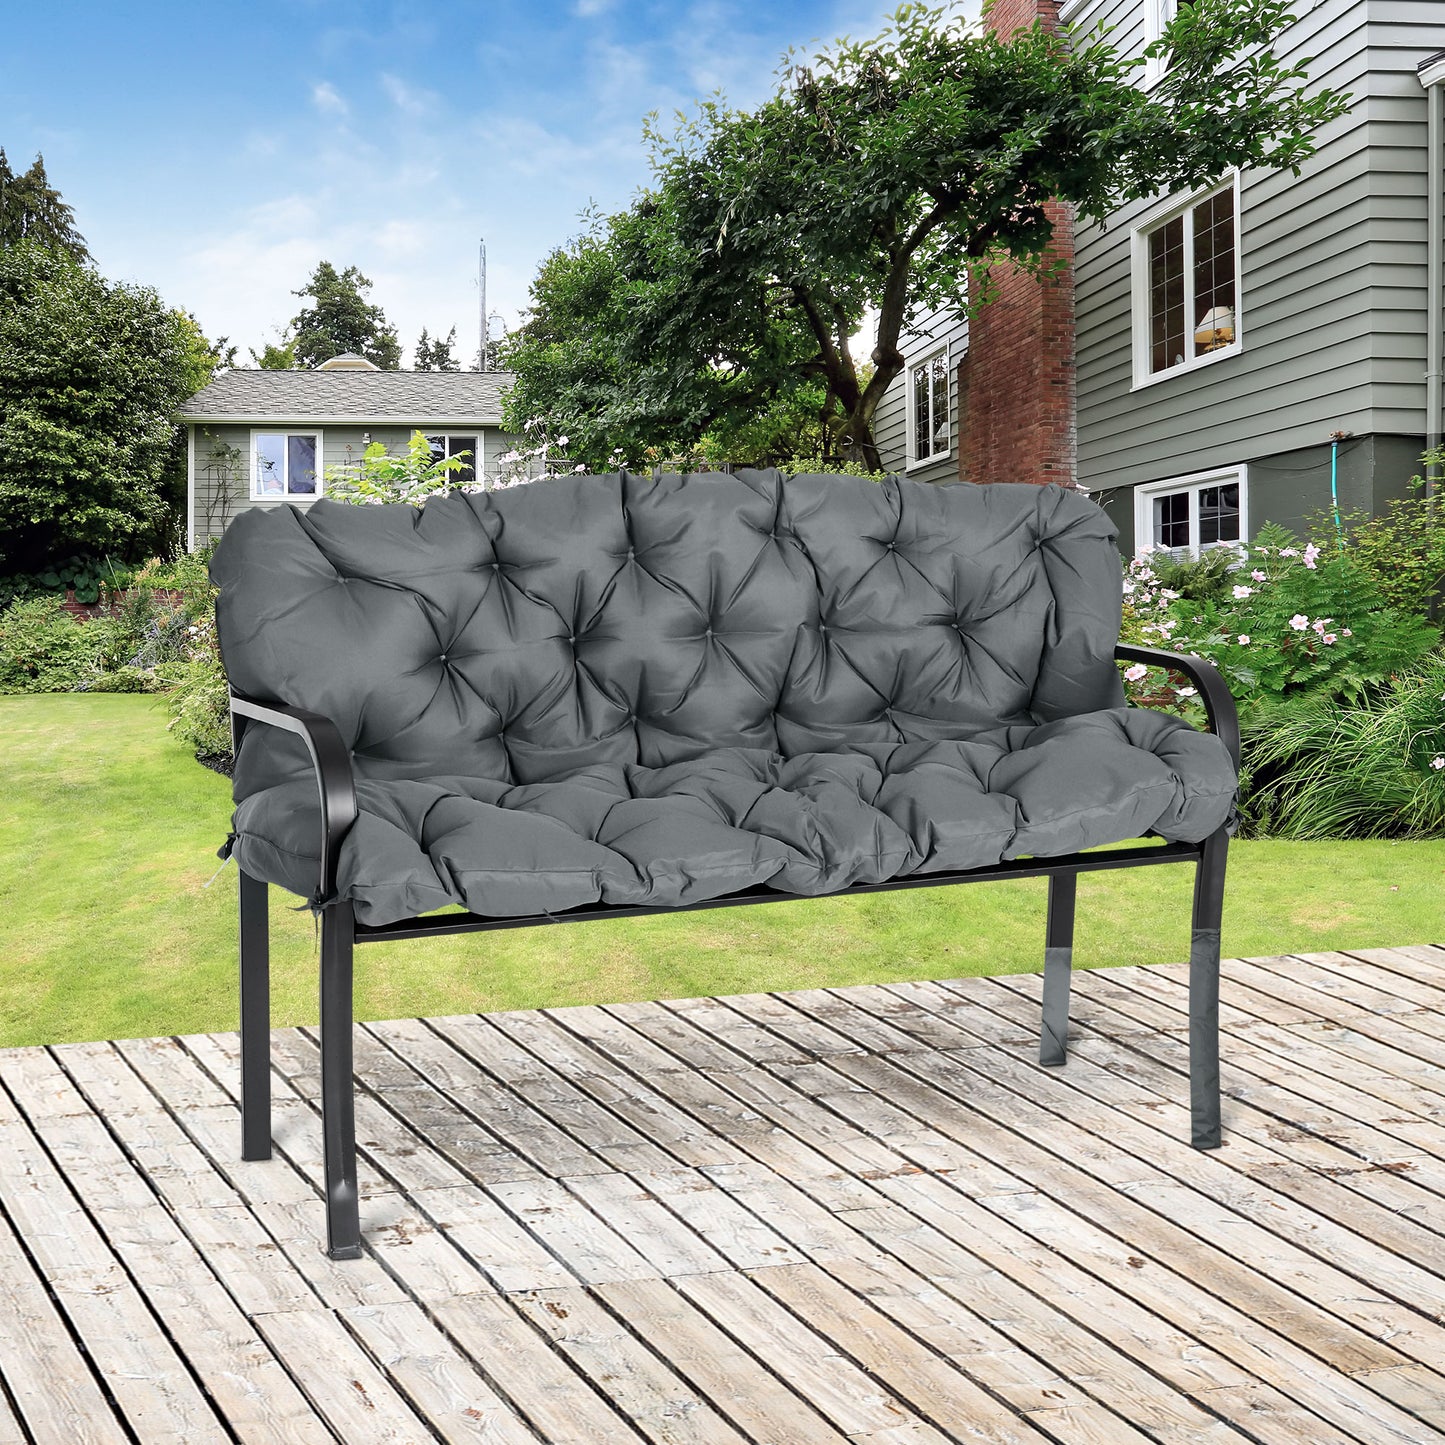 Outsunny 3 Seater Outdoor Chair Cushions, Garden Bench Cushion W/ Back and Ties for Indoor and Outdoor Use, 98 x 150 cm, Dark Grey